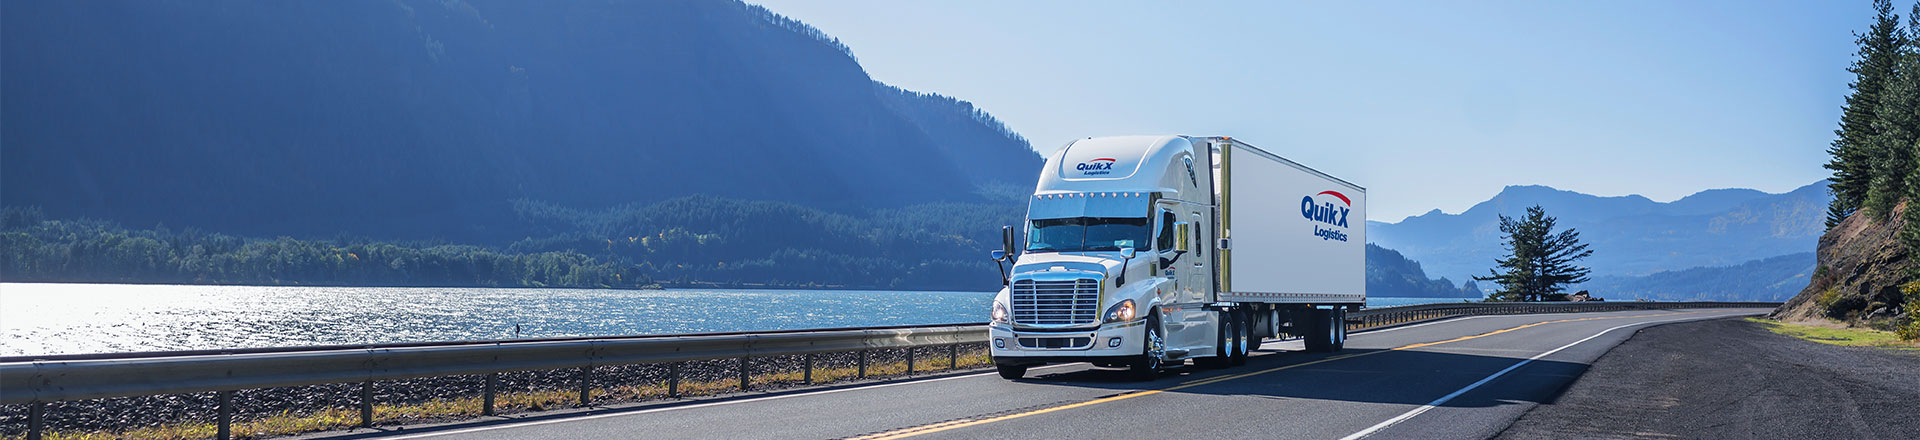 Quik X Logistics truck driving in front of Canadian lake